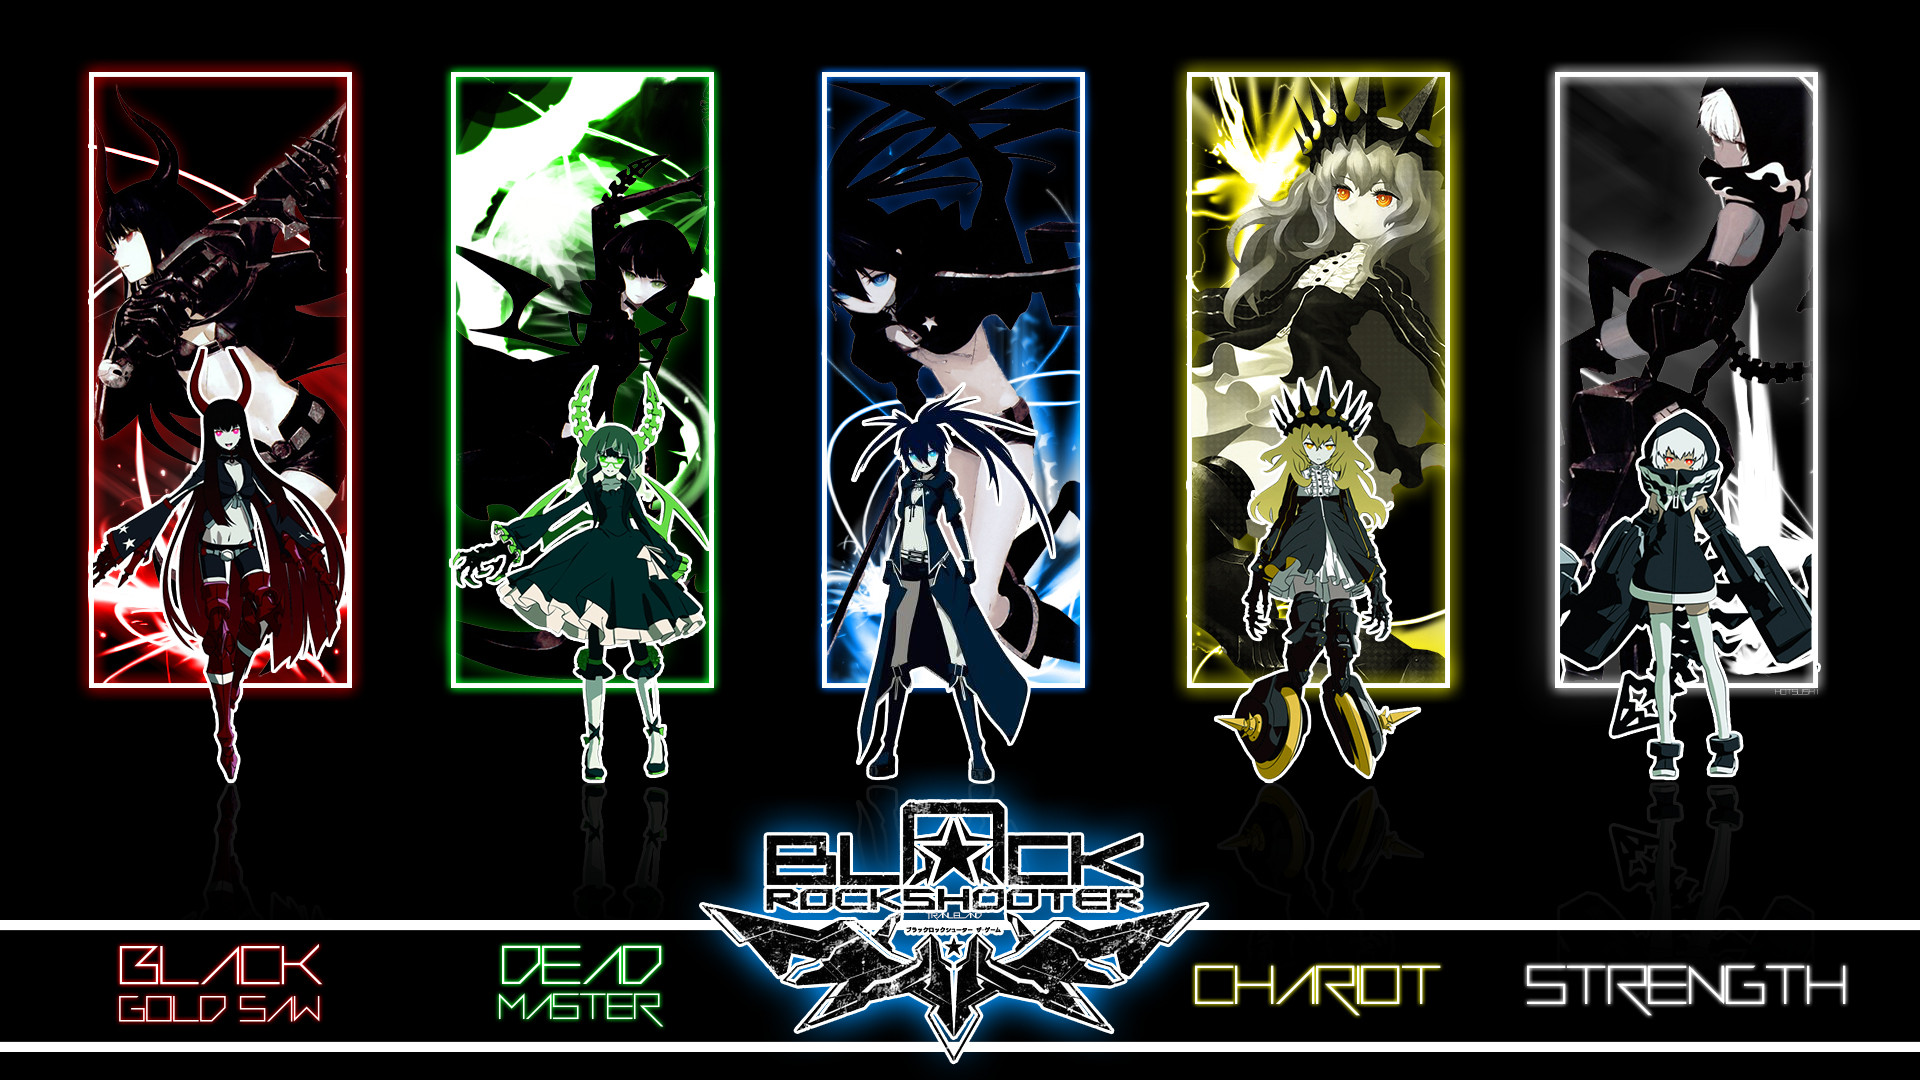 Strength (Black Rock Shooter) HD download for free